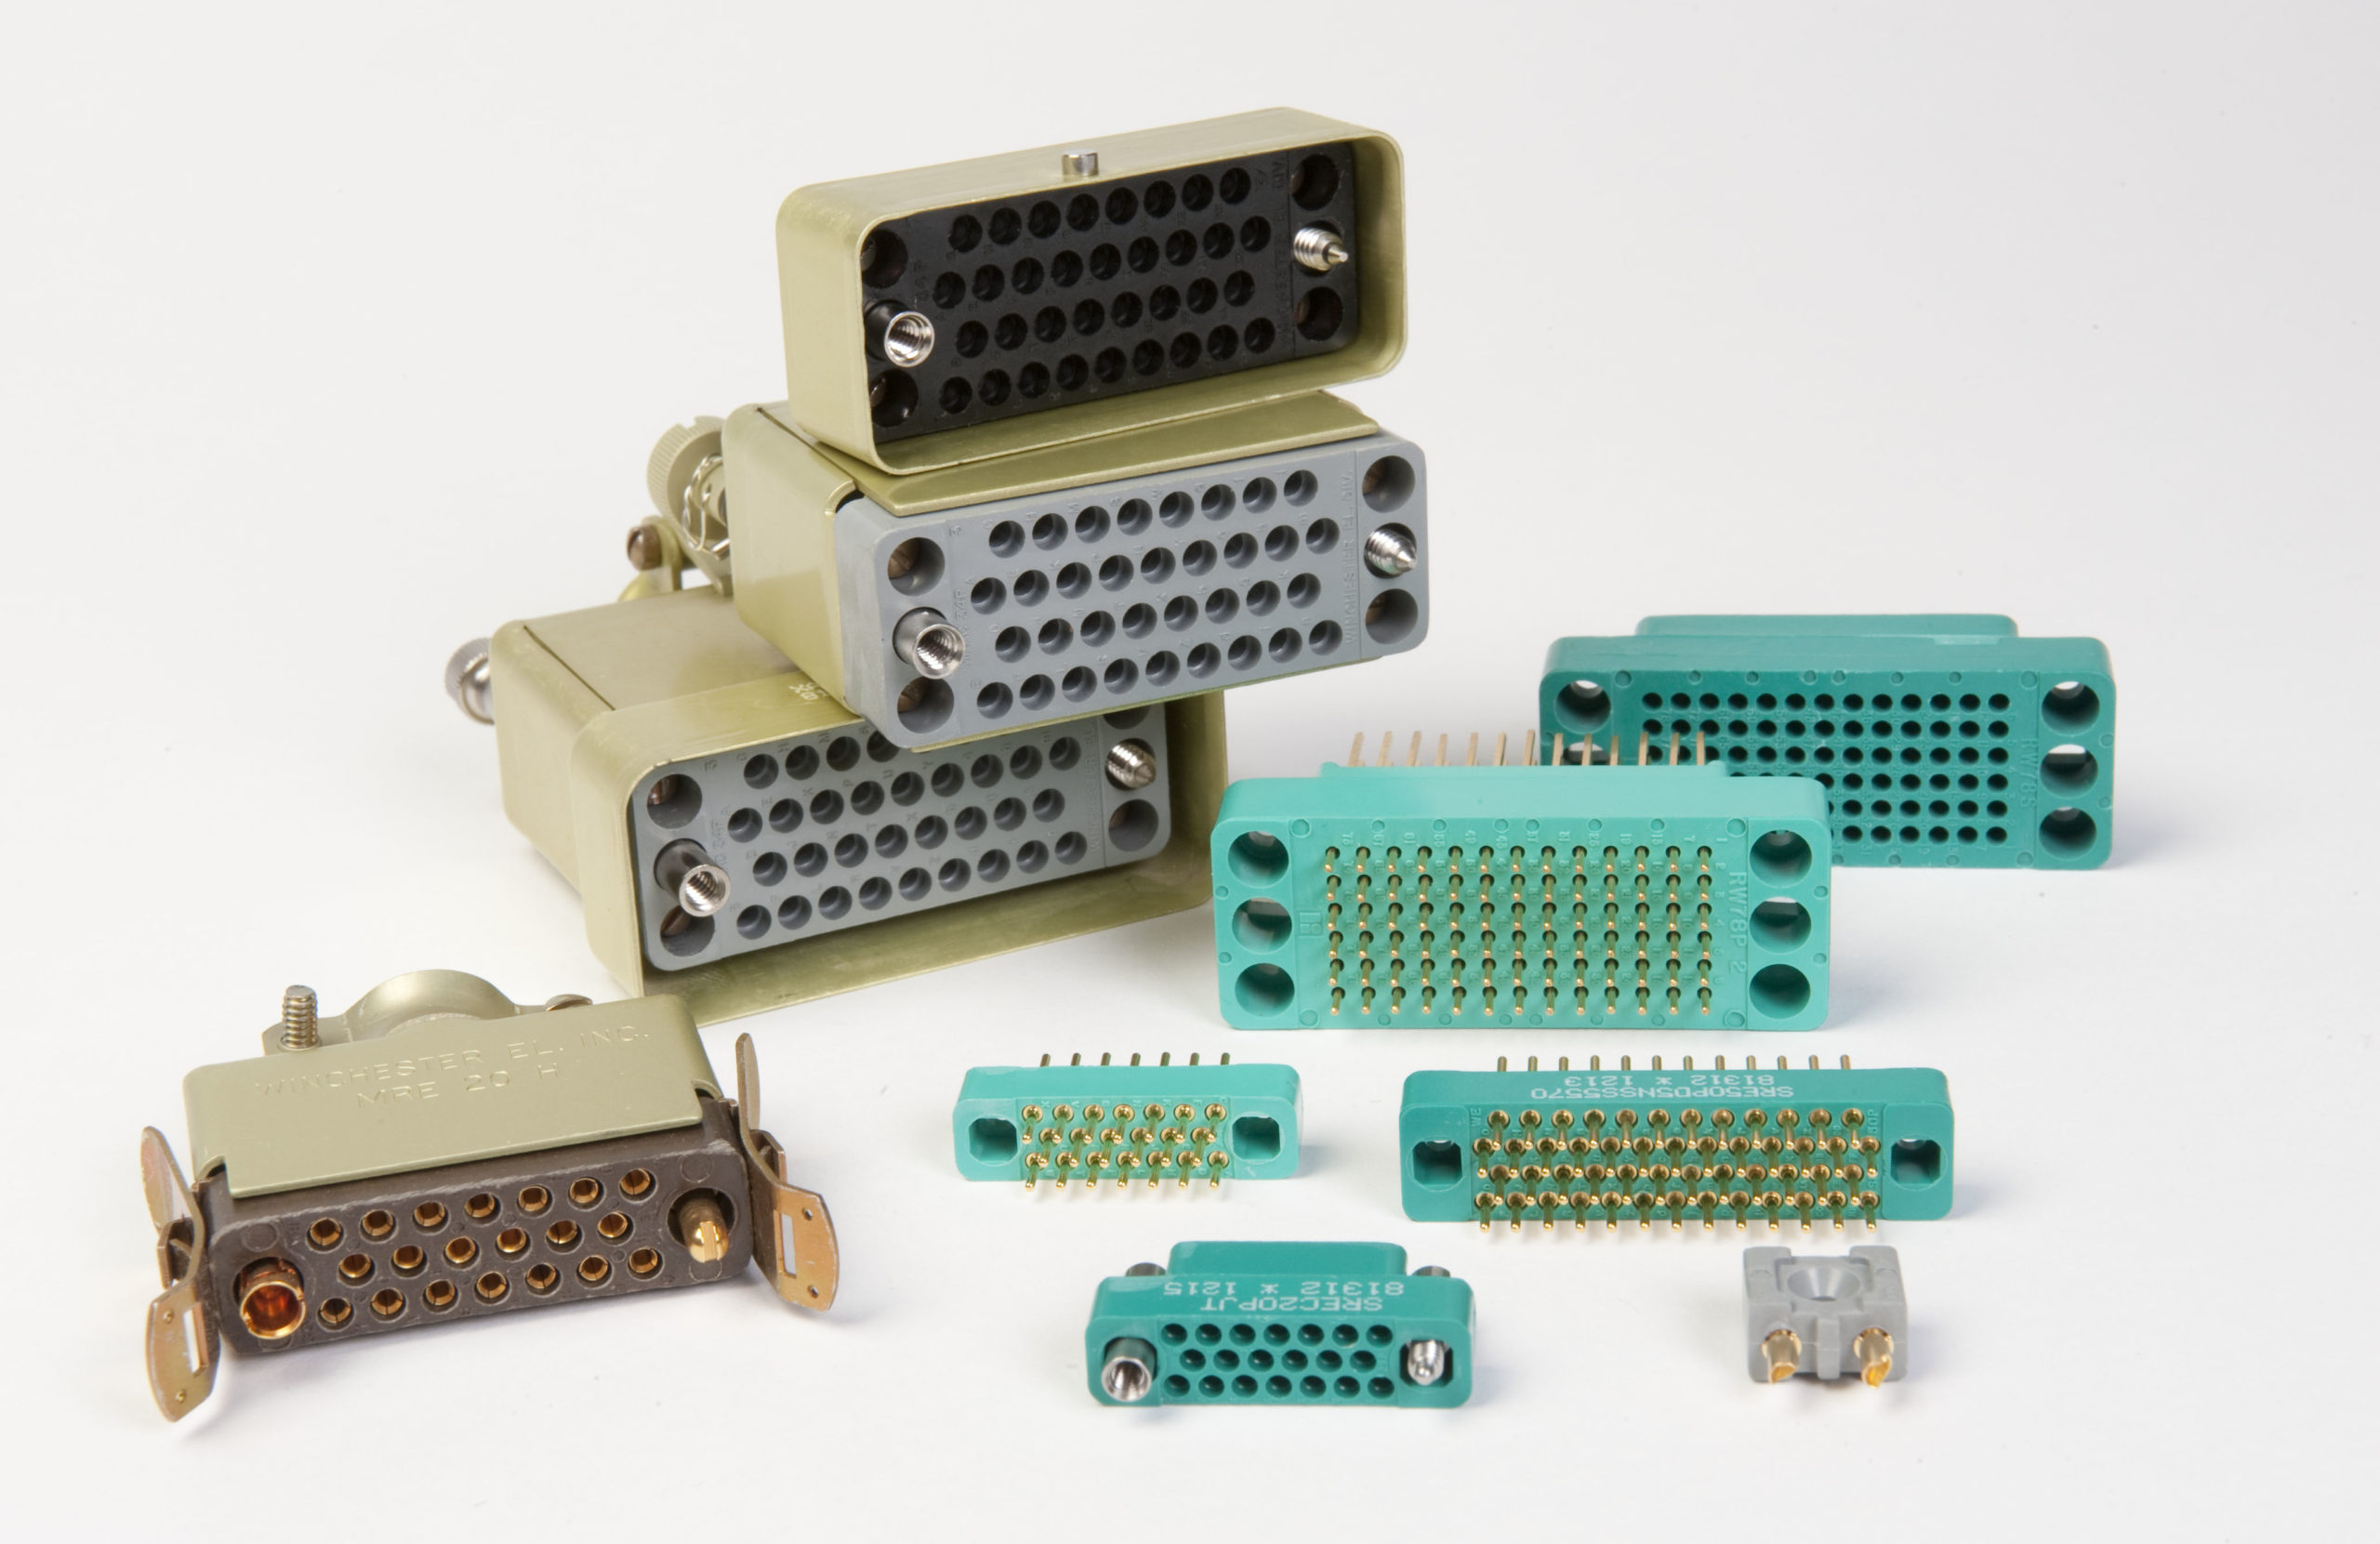 Winchester MRAC Series available from CDM Electronics